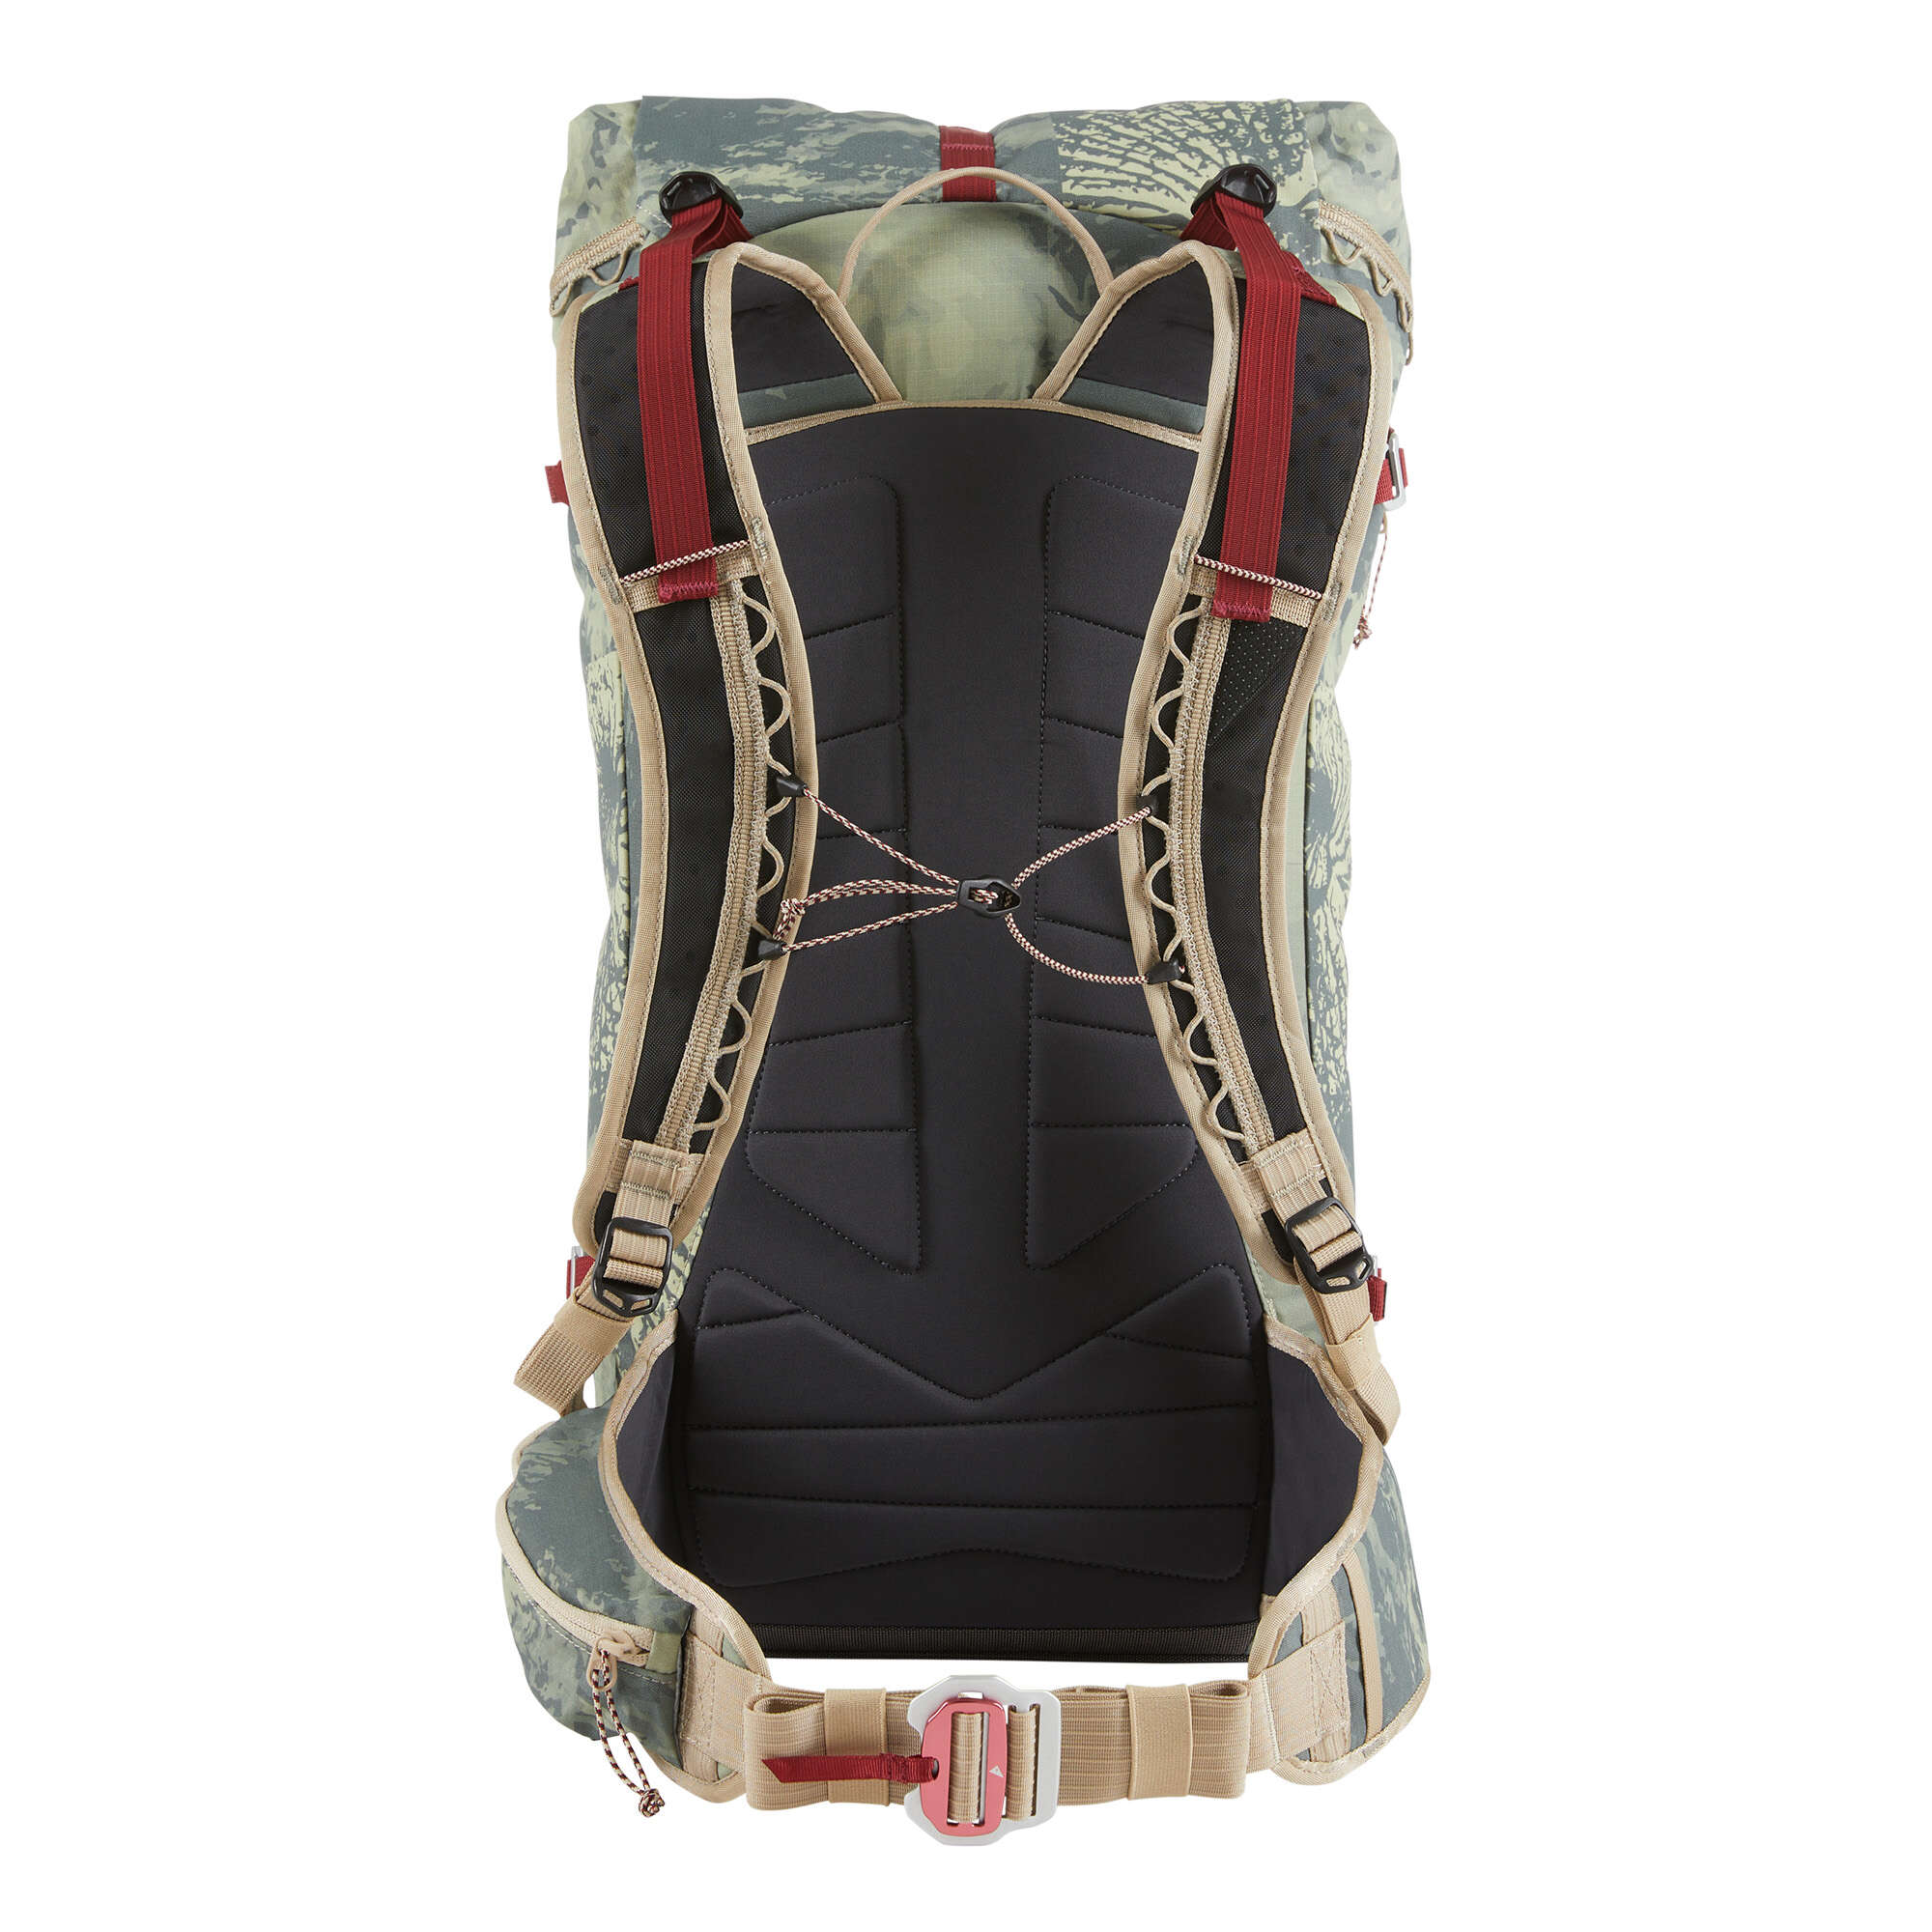 197 Retina Mountain Backpack - Ull Limited Edition